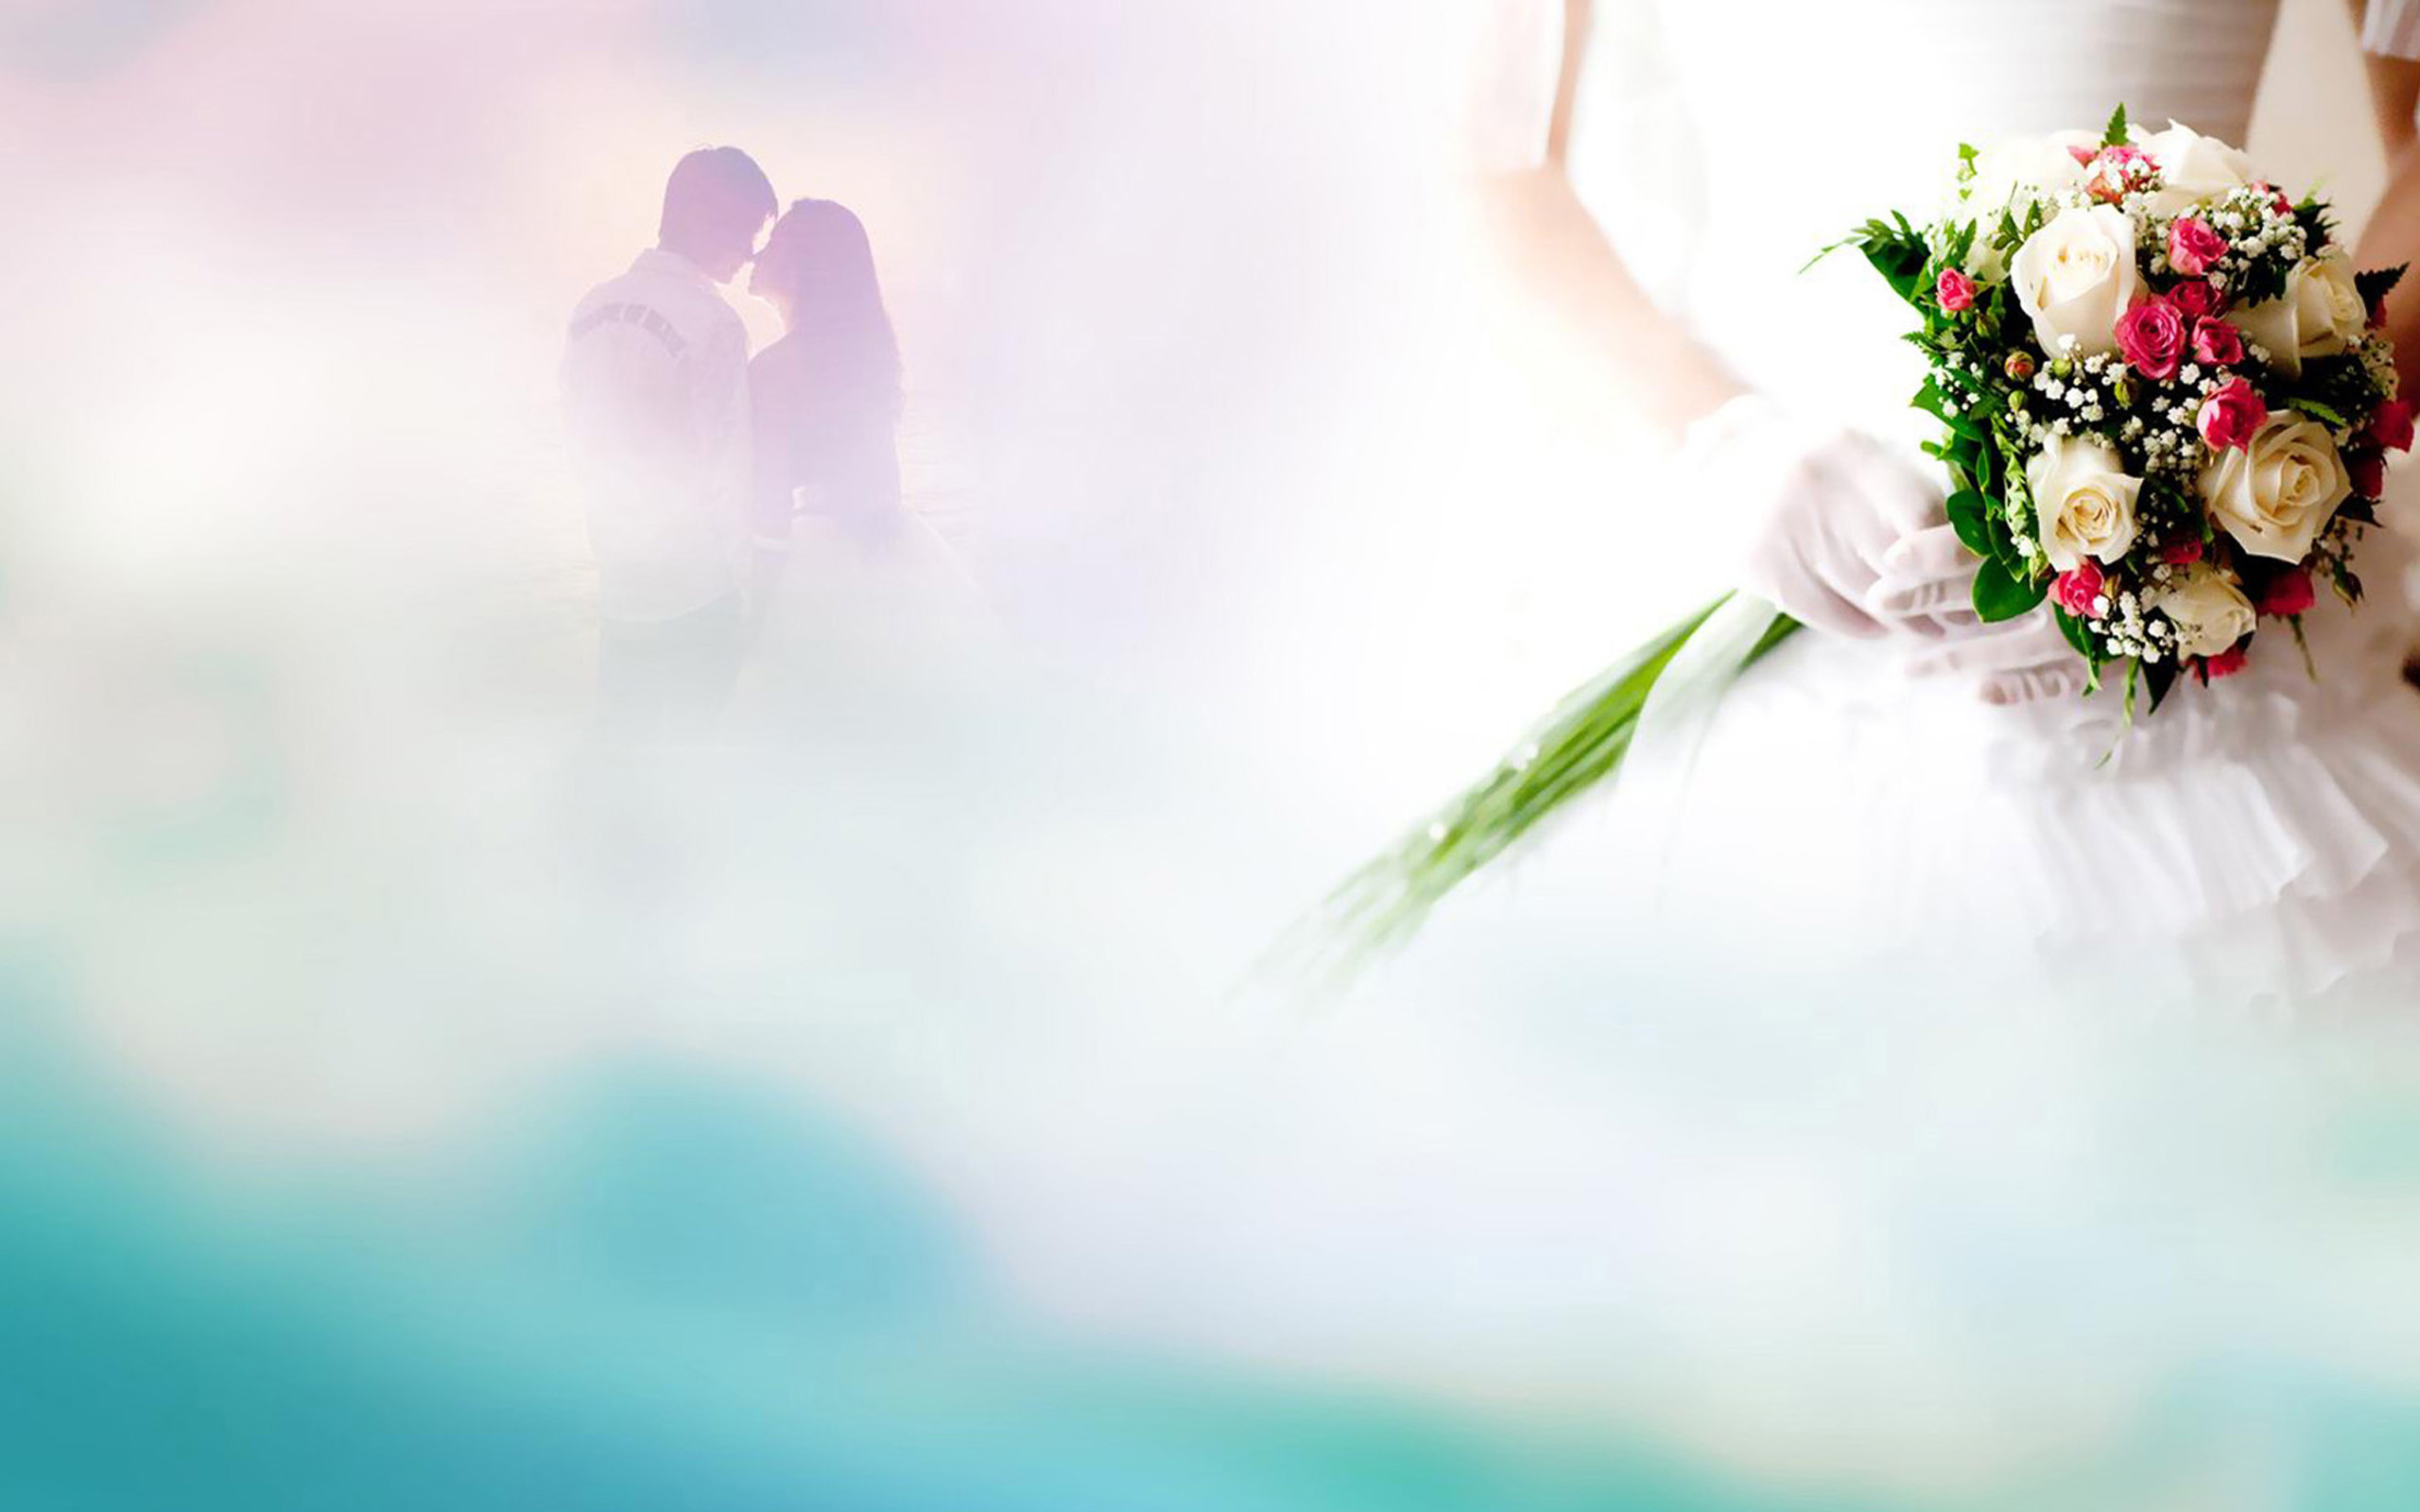 2560x1600 1920x1200 Image: Wedding Flowers wallpapers and stock photos. ÃÂ«